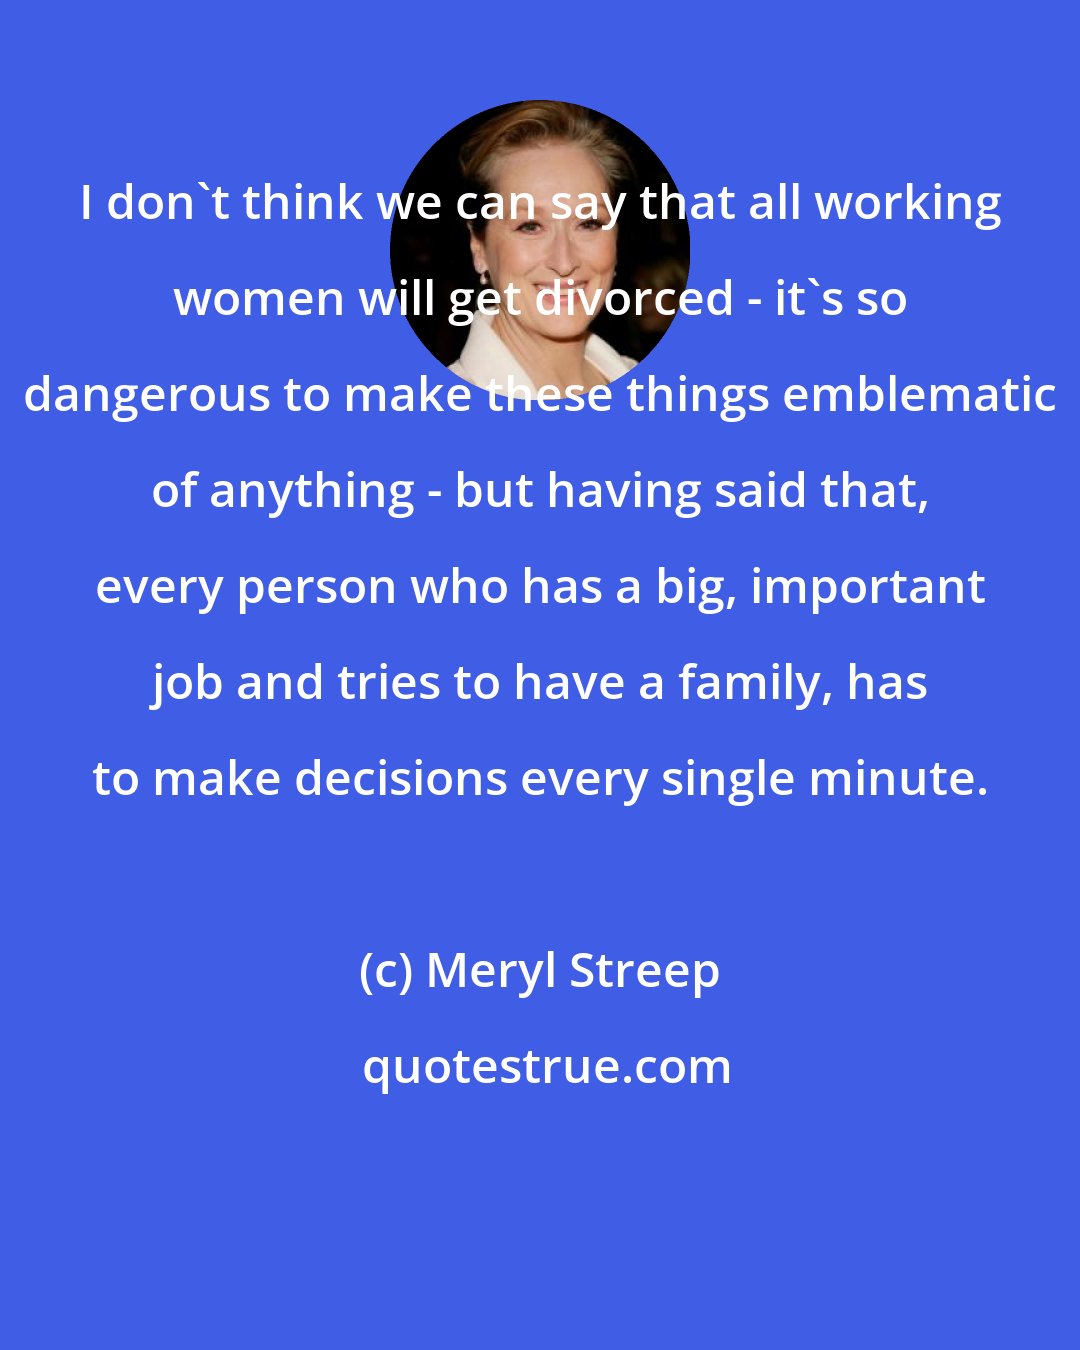 Meryl Streep: I don't think we can say that all working women will get divorced - it's so dangerous to make these things emblematic of anything - but having said that, every person who has a big, important job and tries to have a family, has to make decisions every single minute.